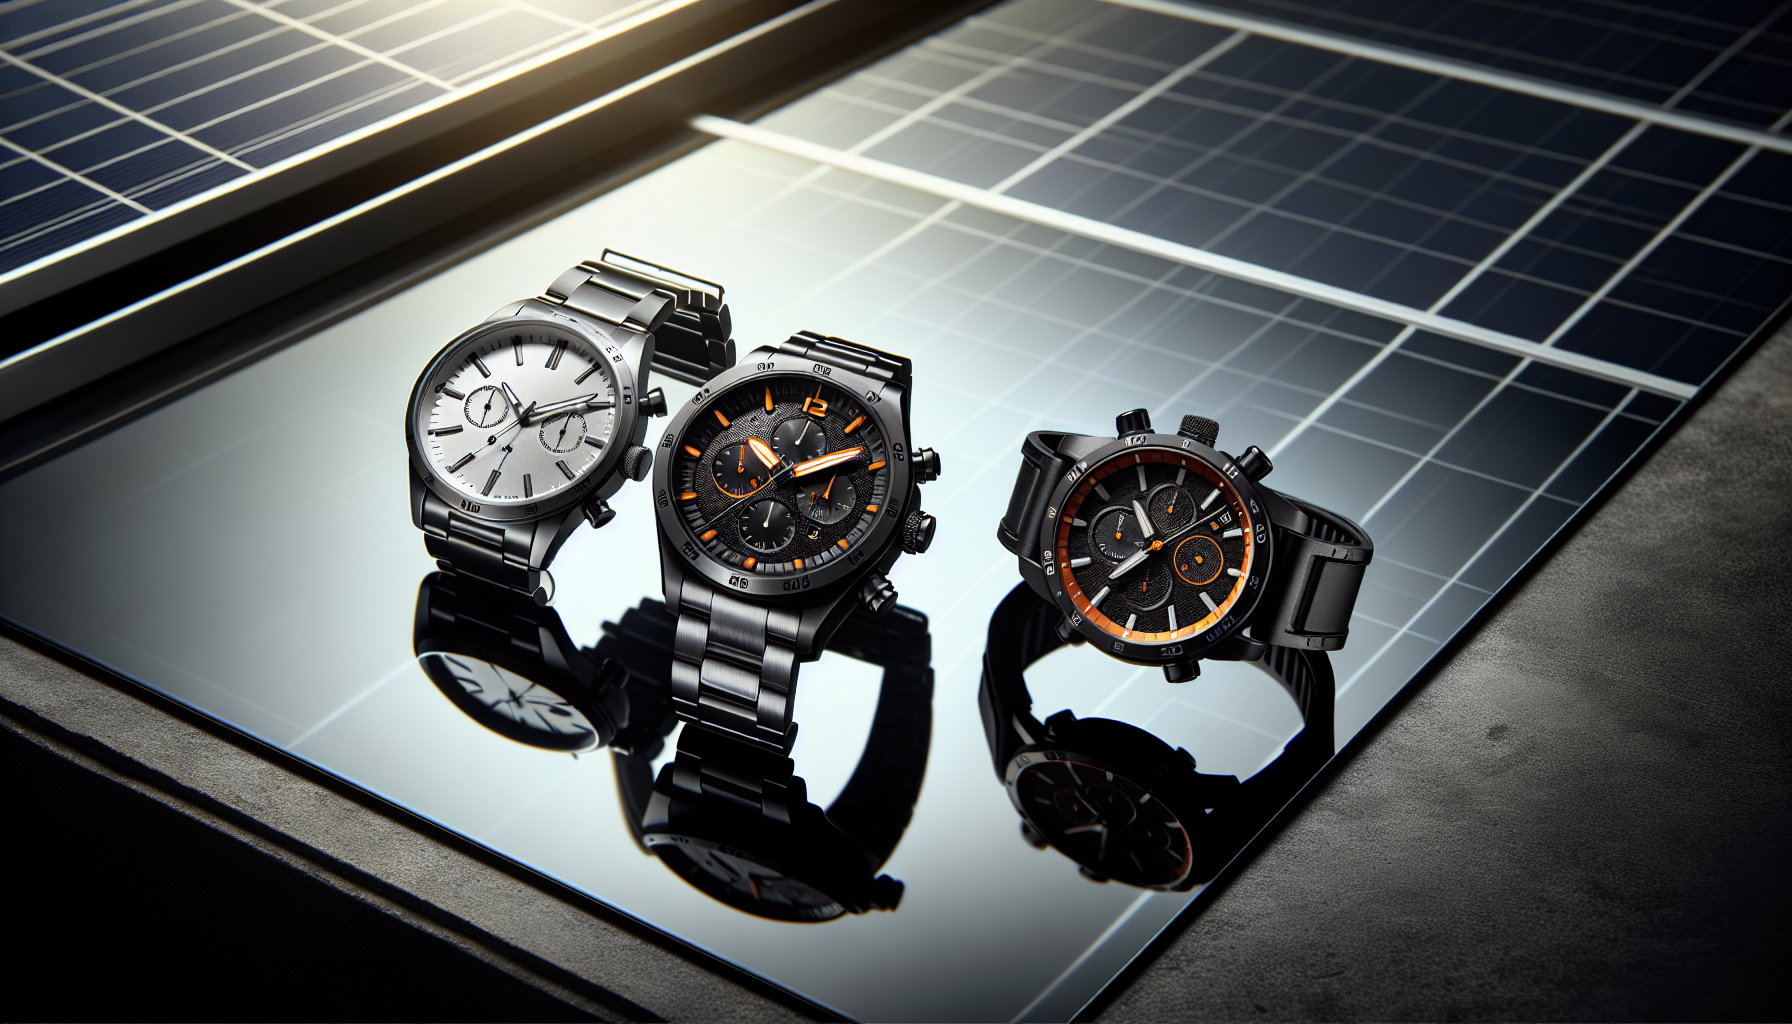 Affordable Solar Watches